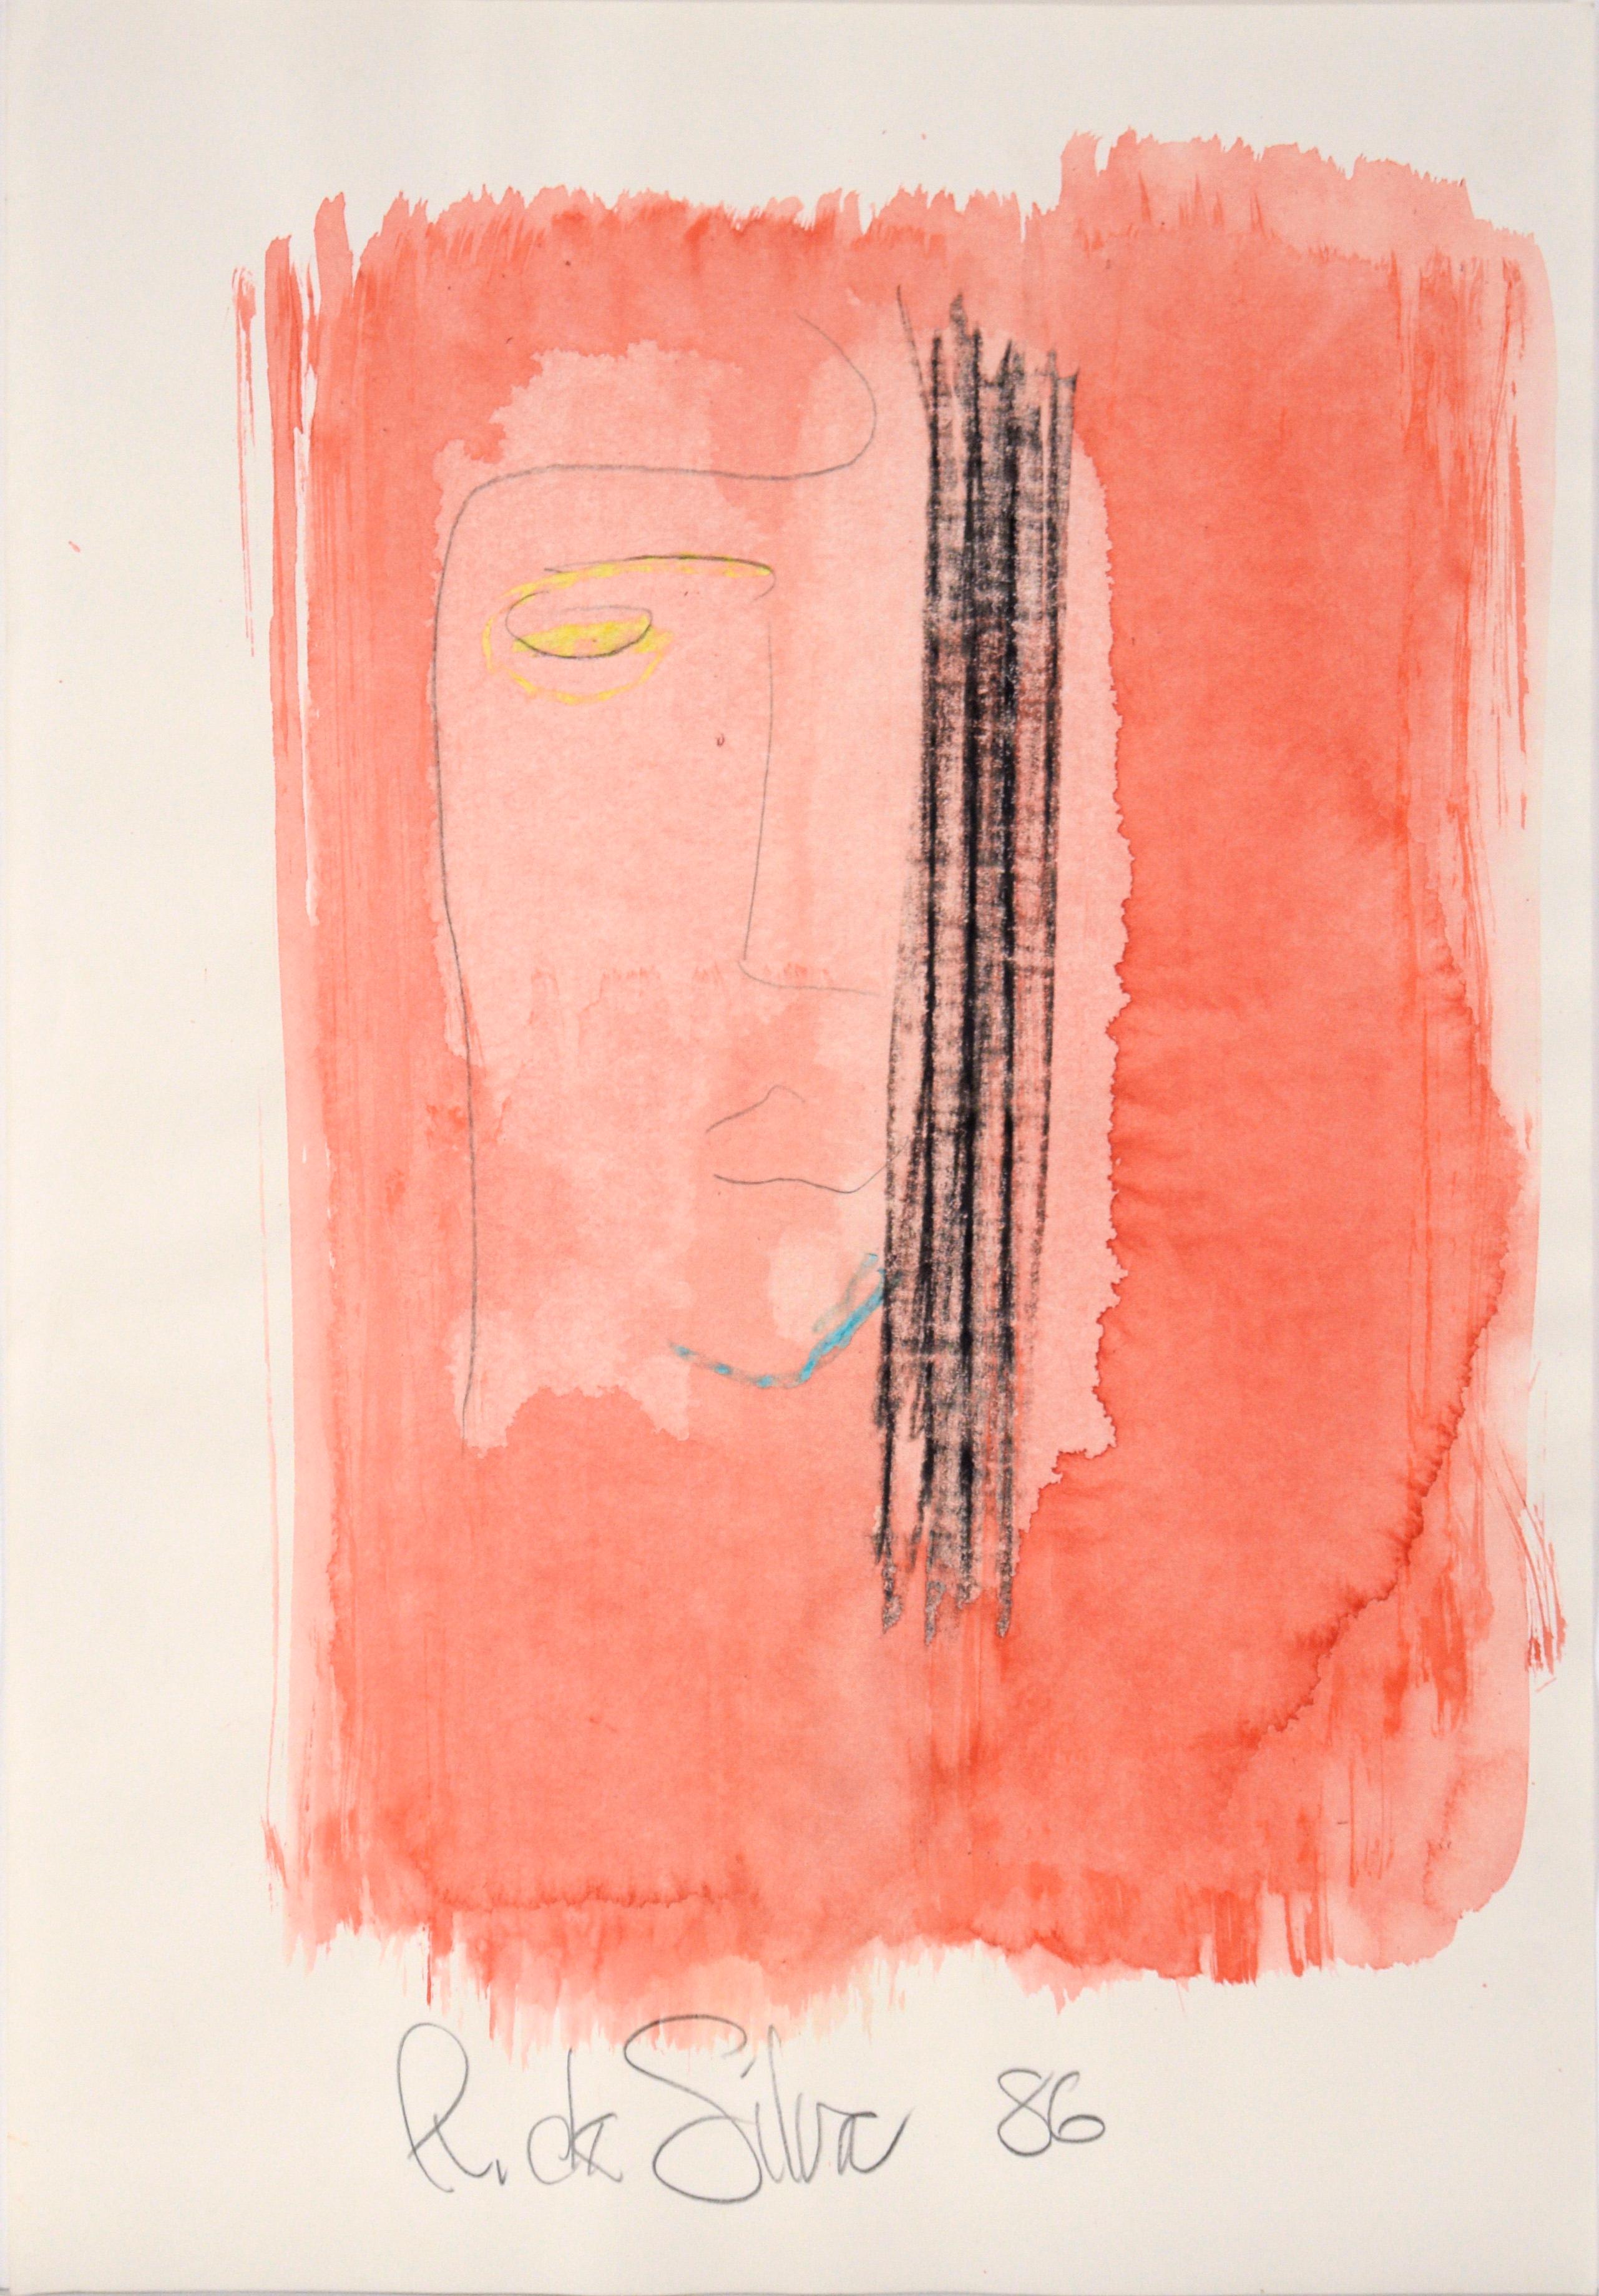 Ricardo de Silva Figurative Painting - Minimalist Pink Abstract Figural in Acrylic on Paper